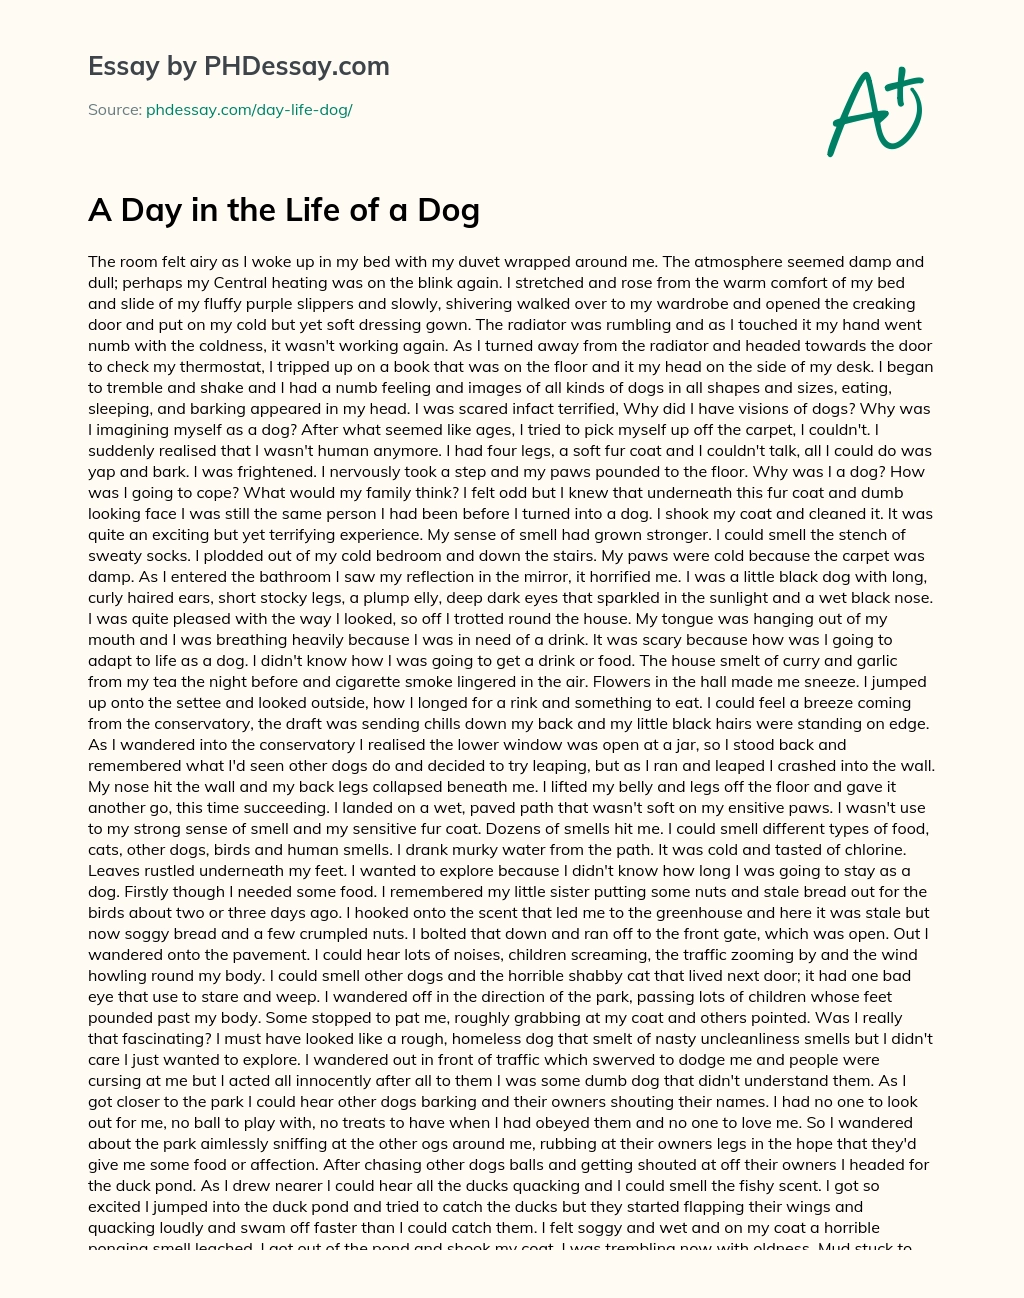 A Day in the Life of a Dog essay